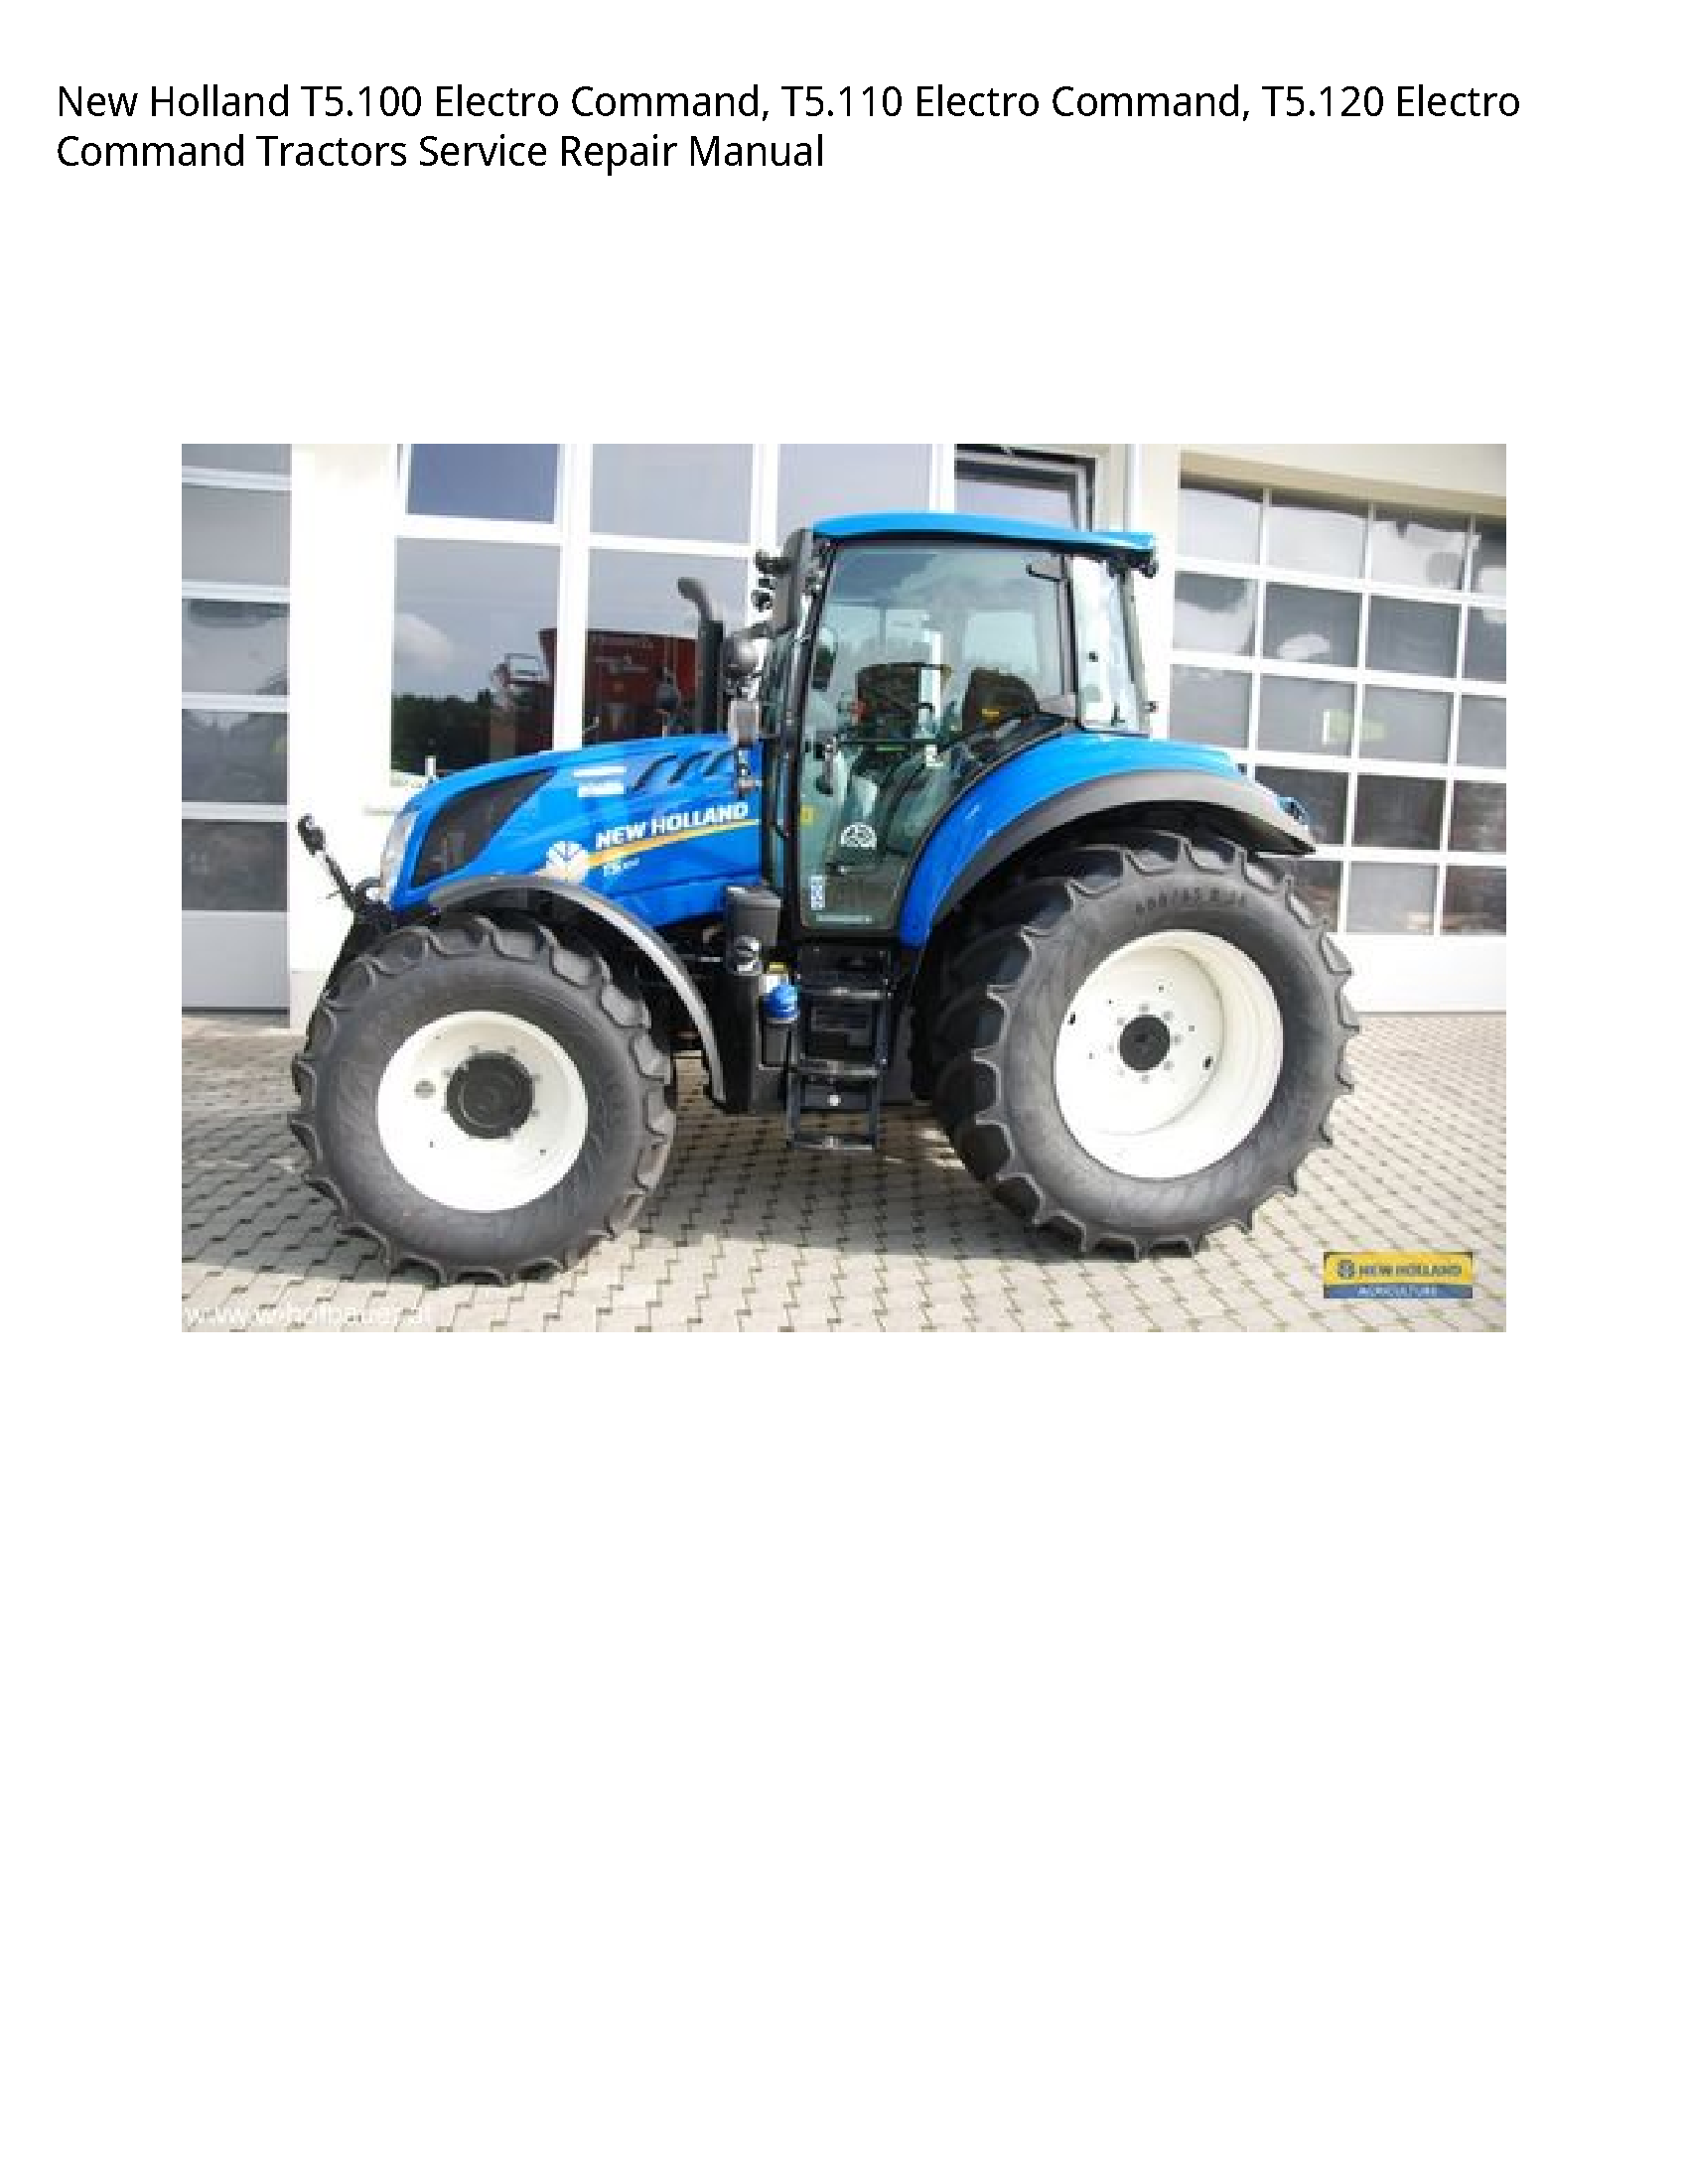 New Holland T5.100 Electro Command manual